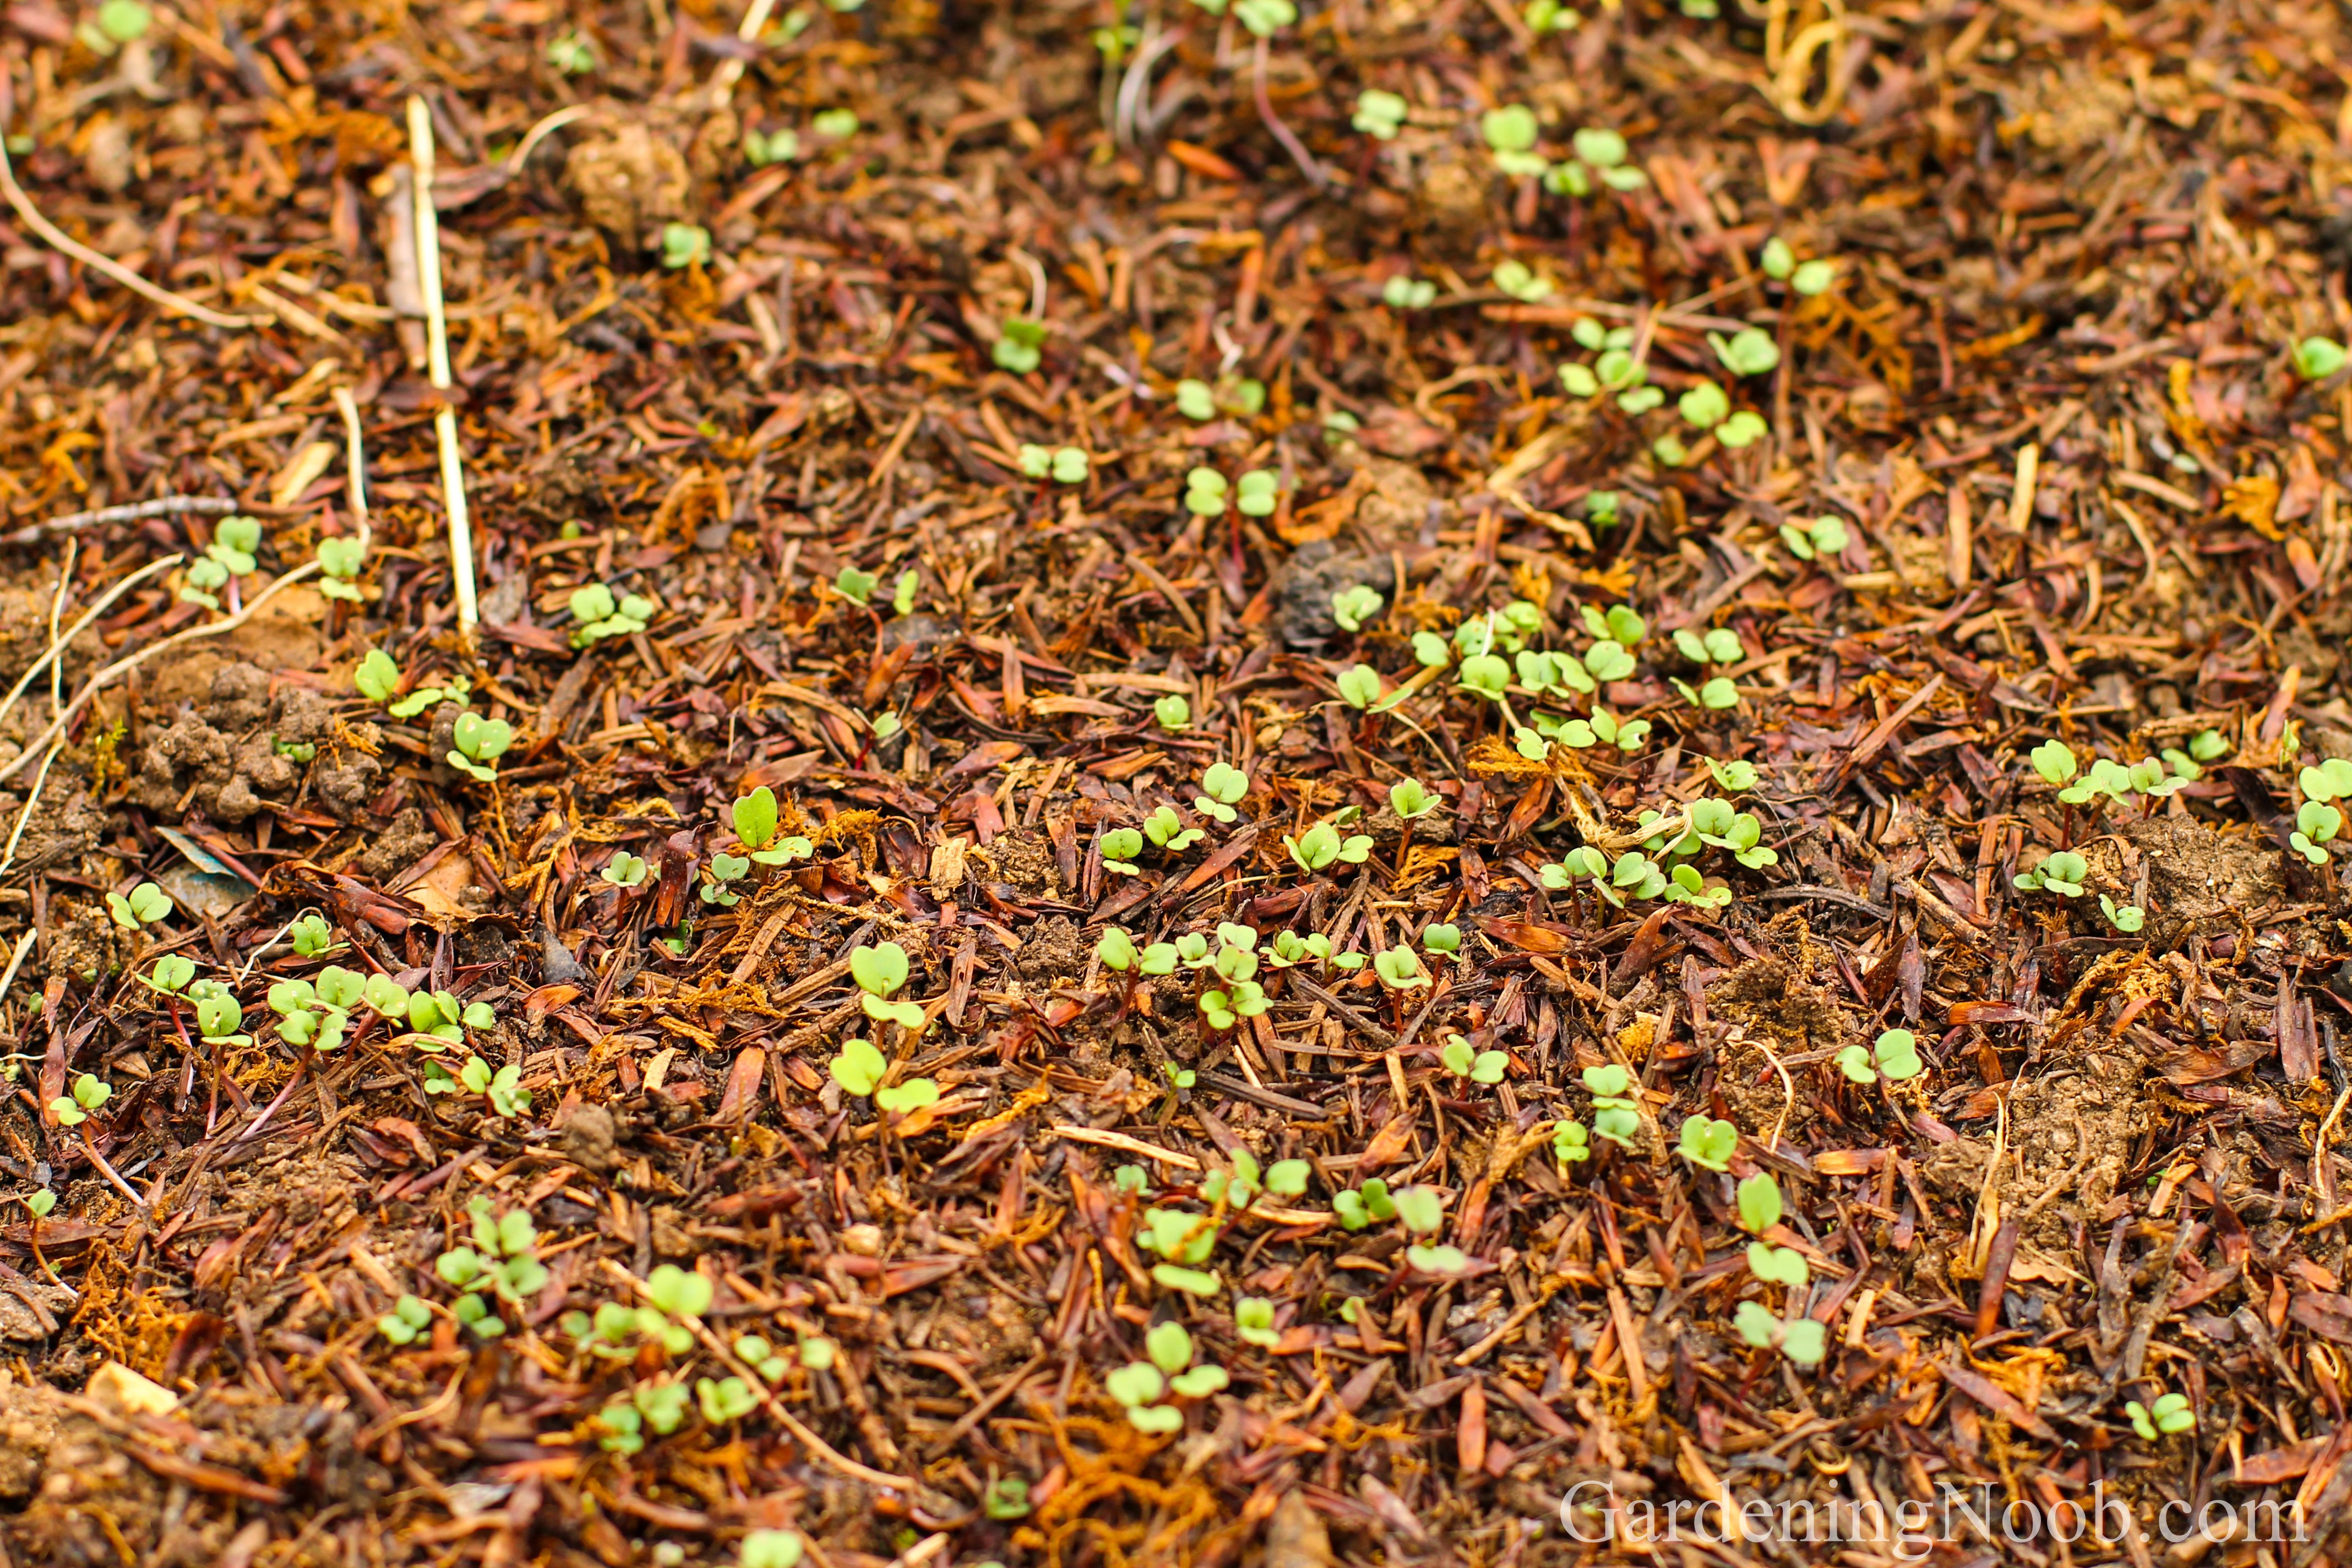 Arugula sown early in spring has just sprung up...